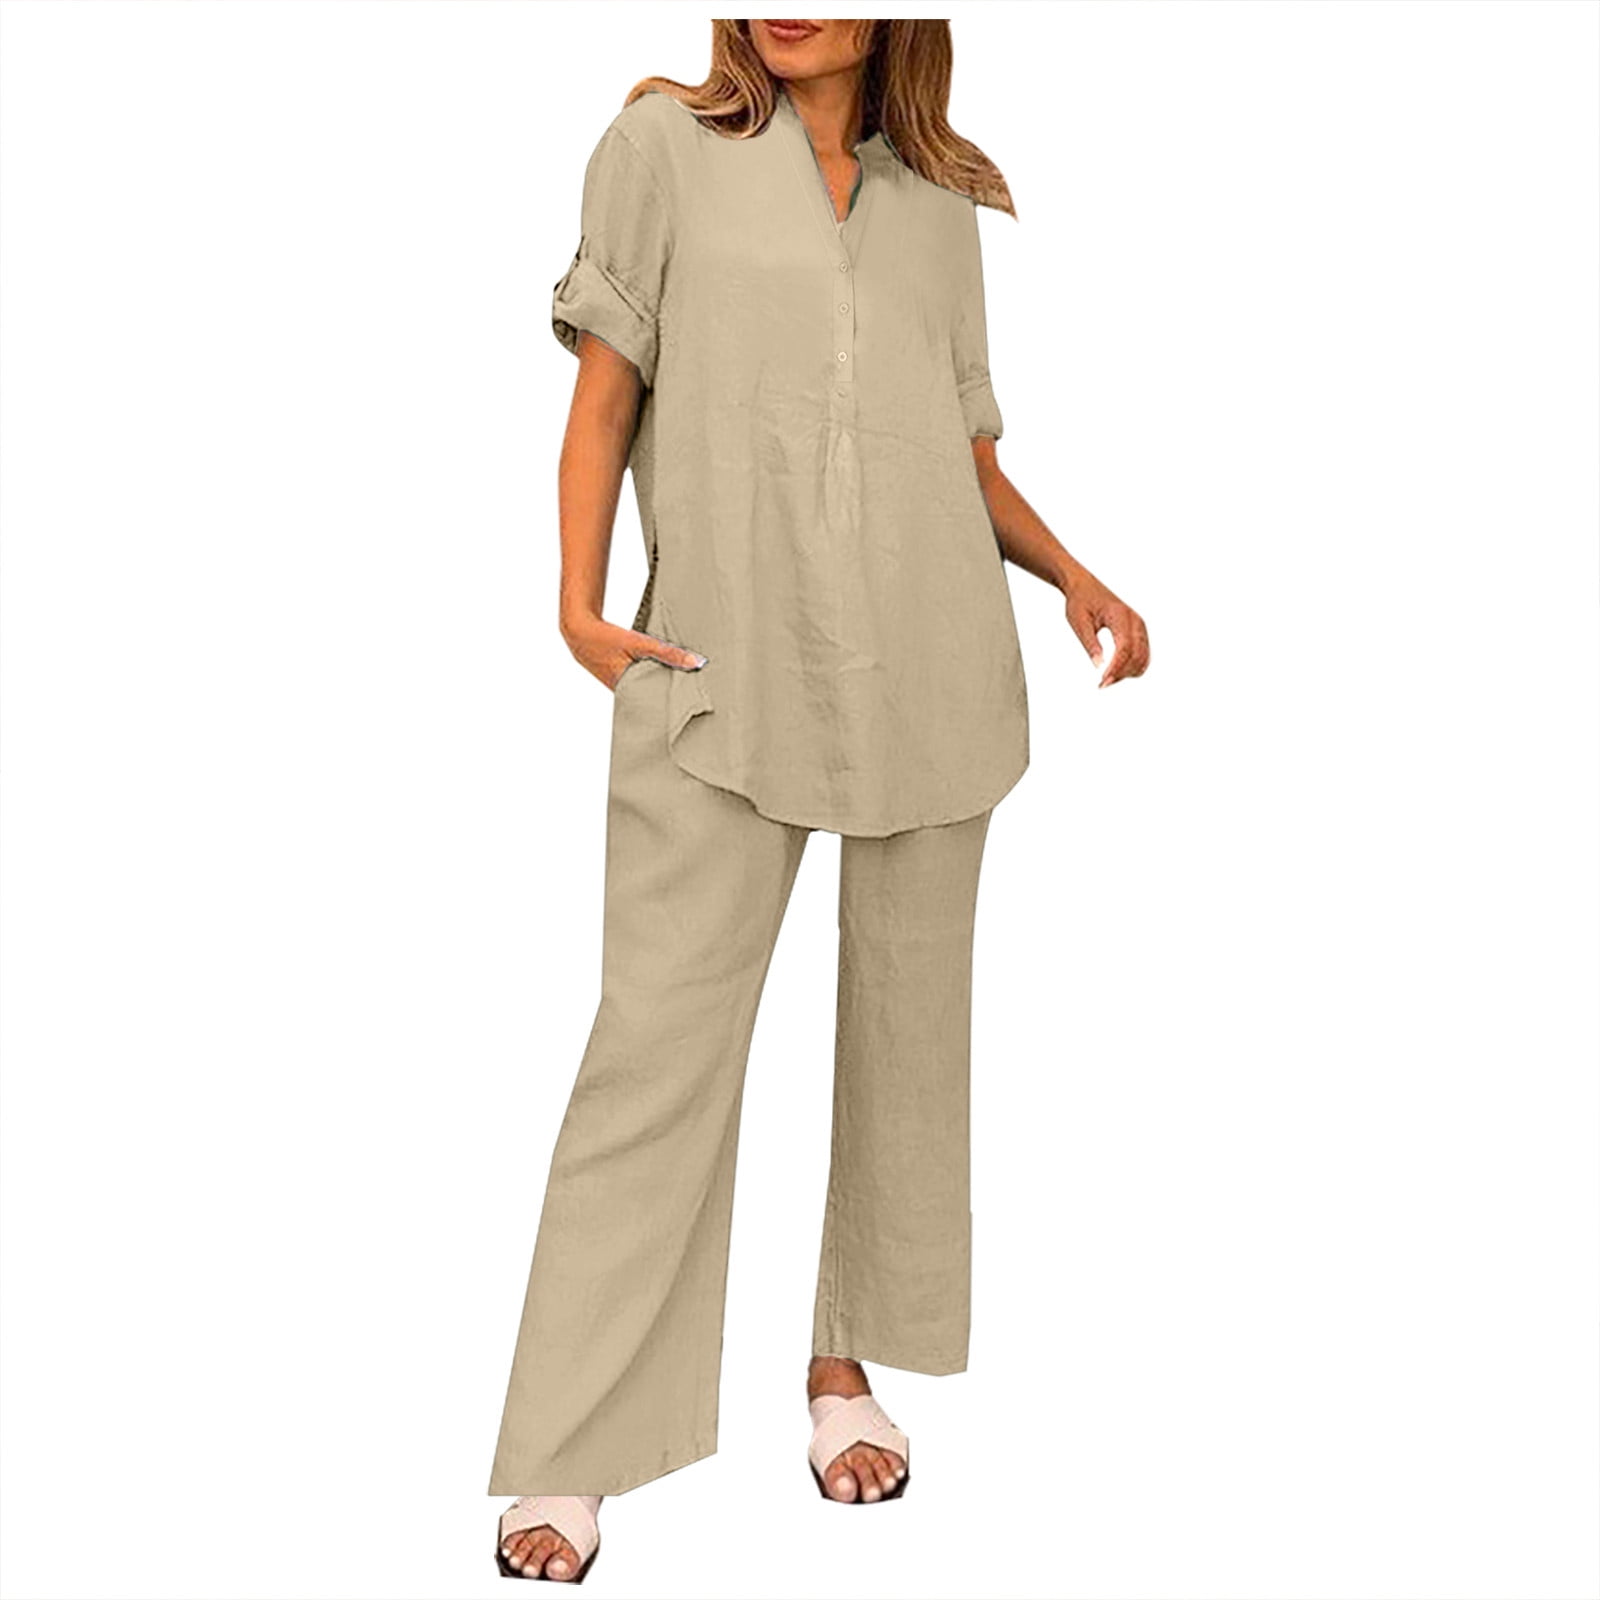 REORIAFEE 2 Piece Outfits for Women 70s Outfits Fashion Women Summer Button  Casual Short Sleeve Top + Pant Set Khaki XXXL